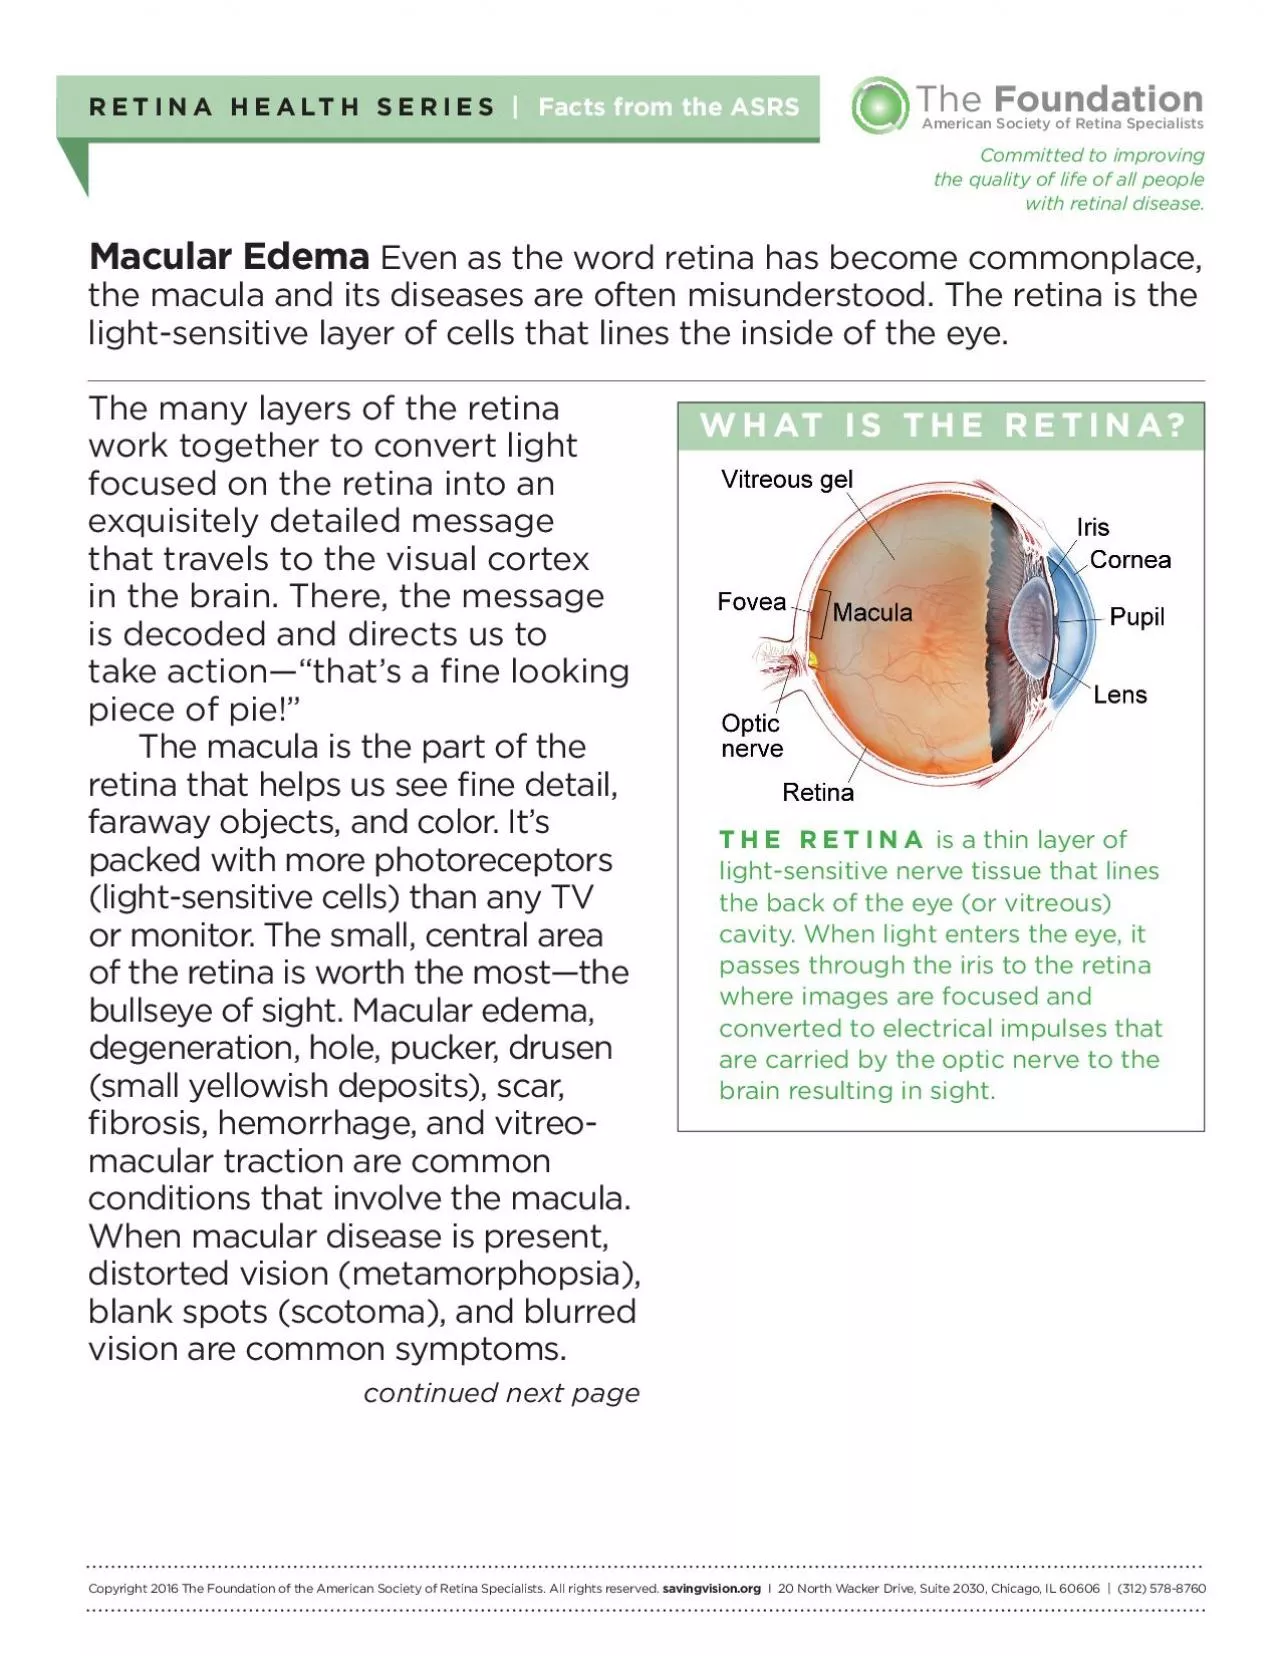 Macular EdemaEven as the word retina has become commonplace the macul